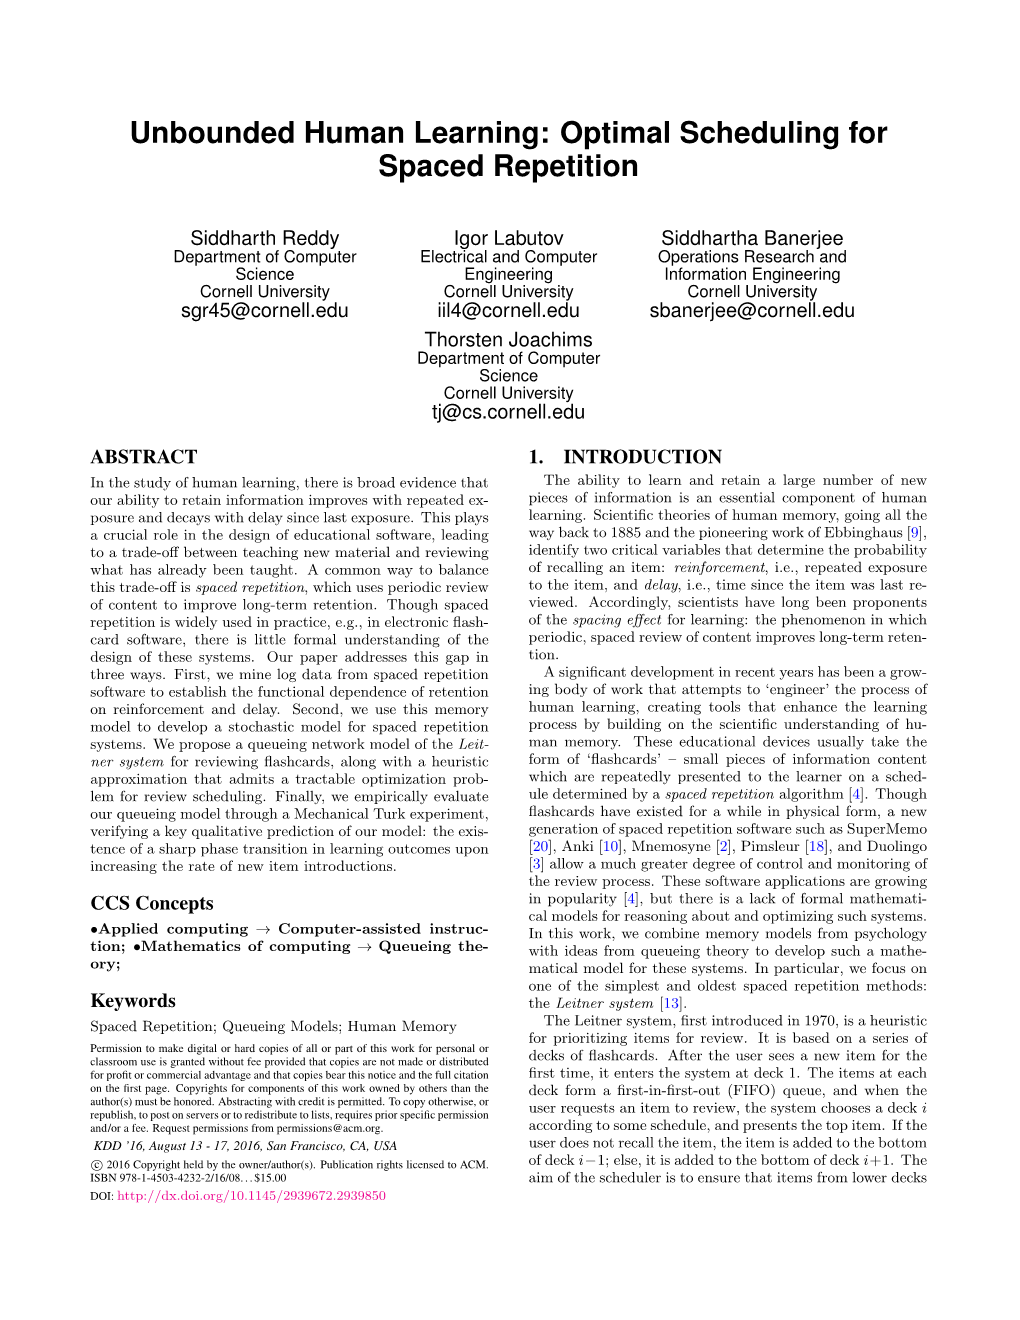 Unbounded Human Learning: Optimal Scheduling for Spaced Repetition